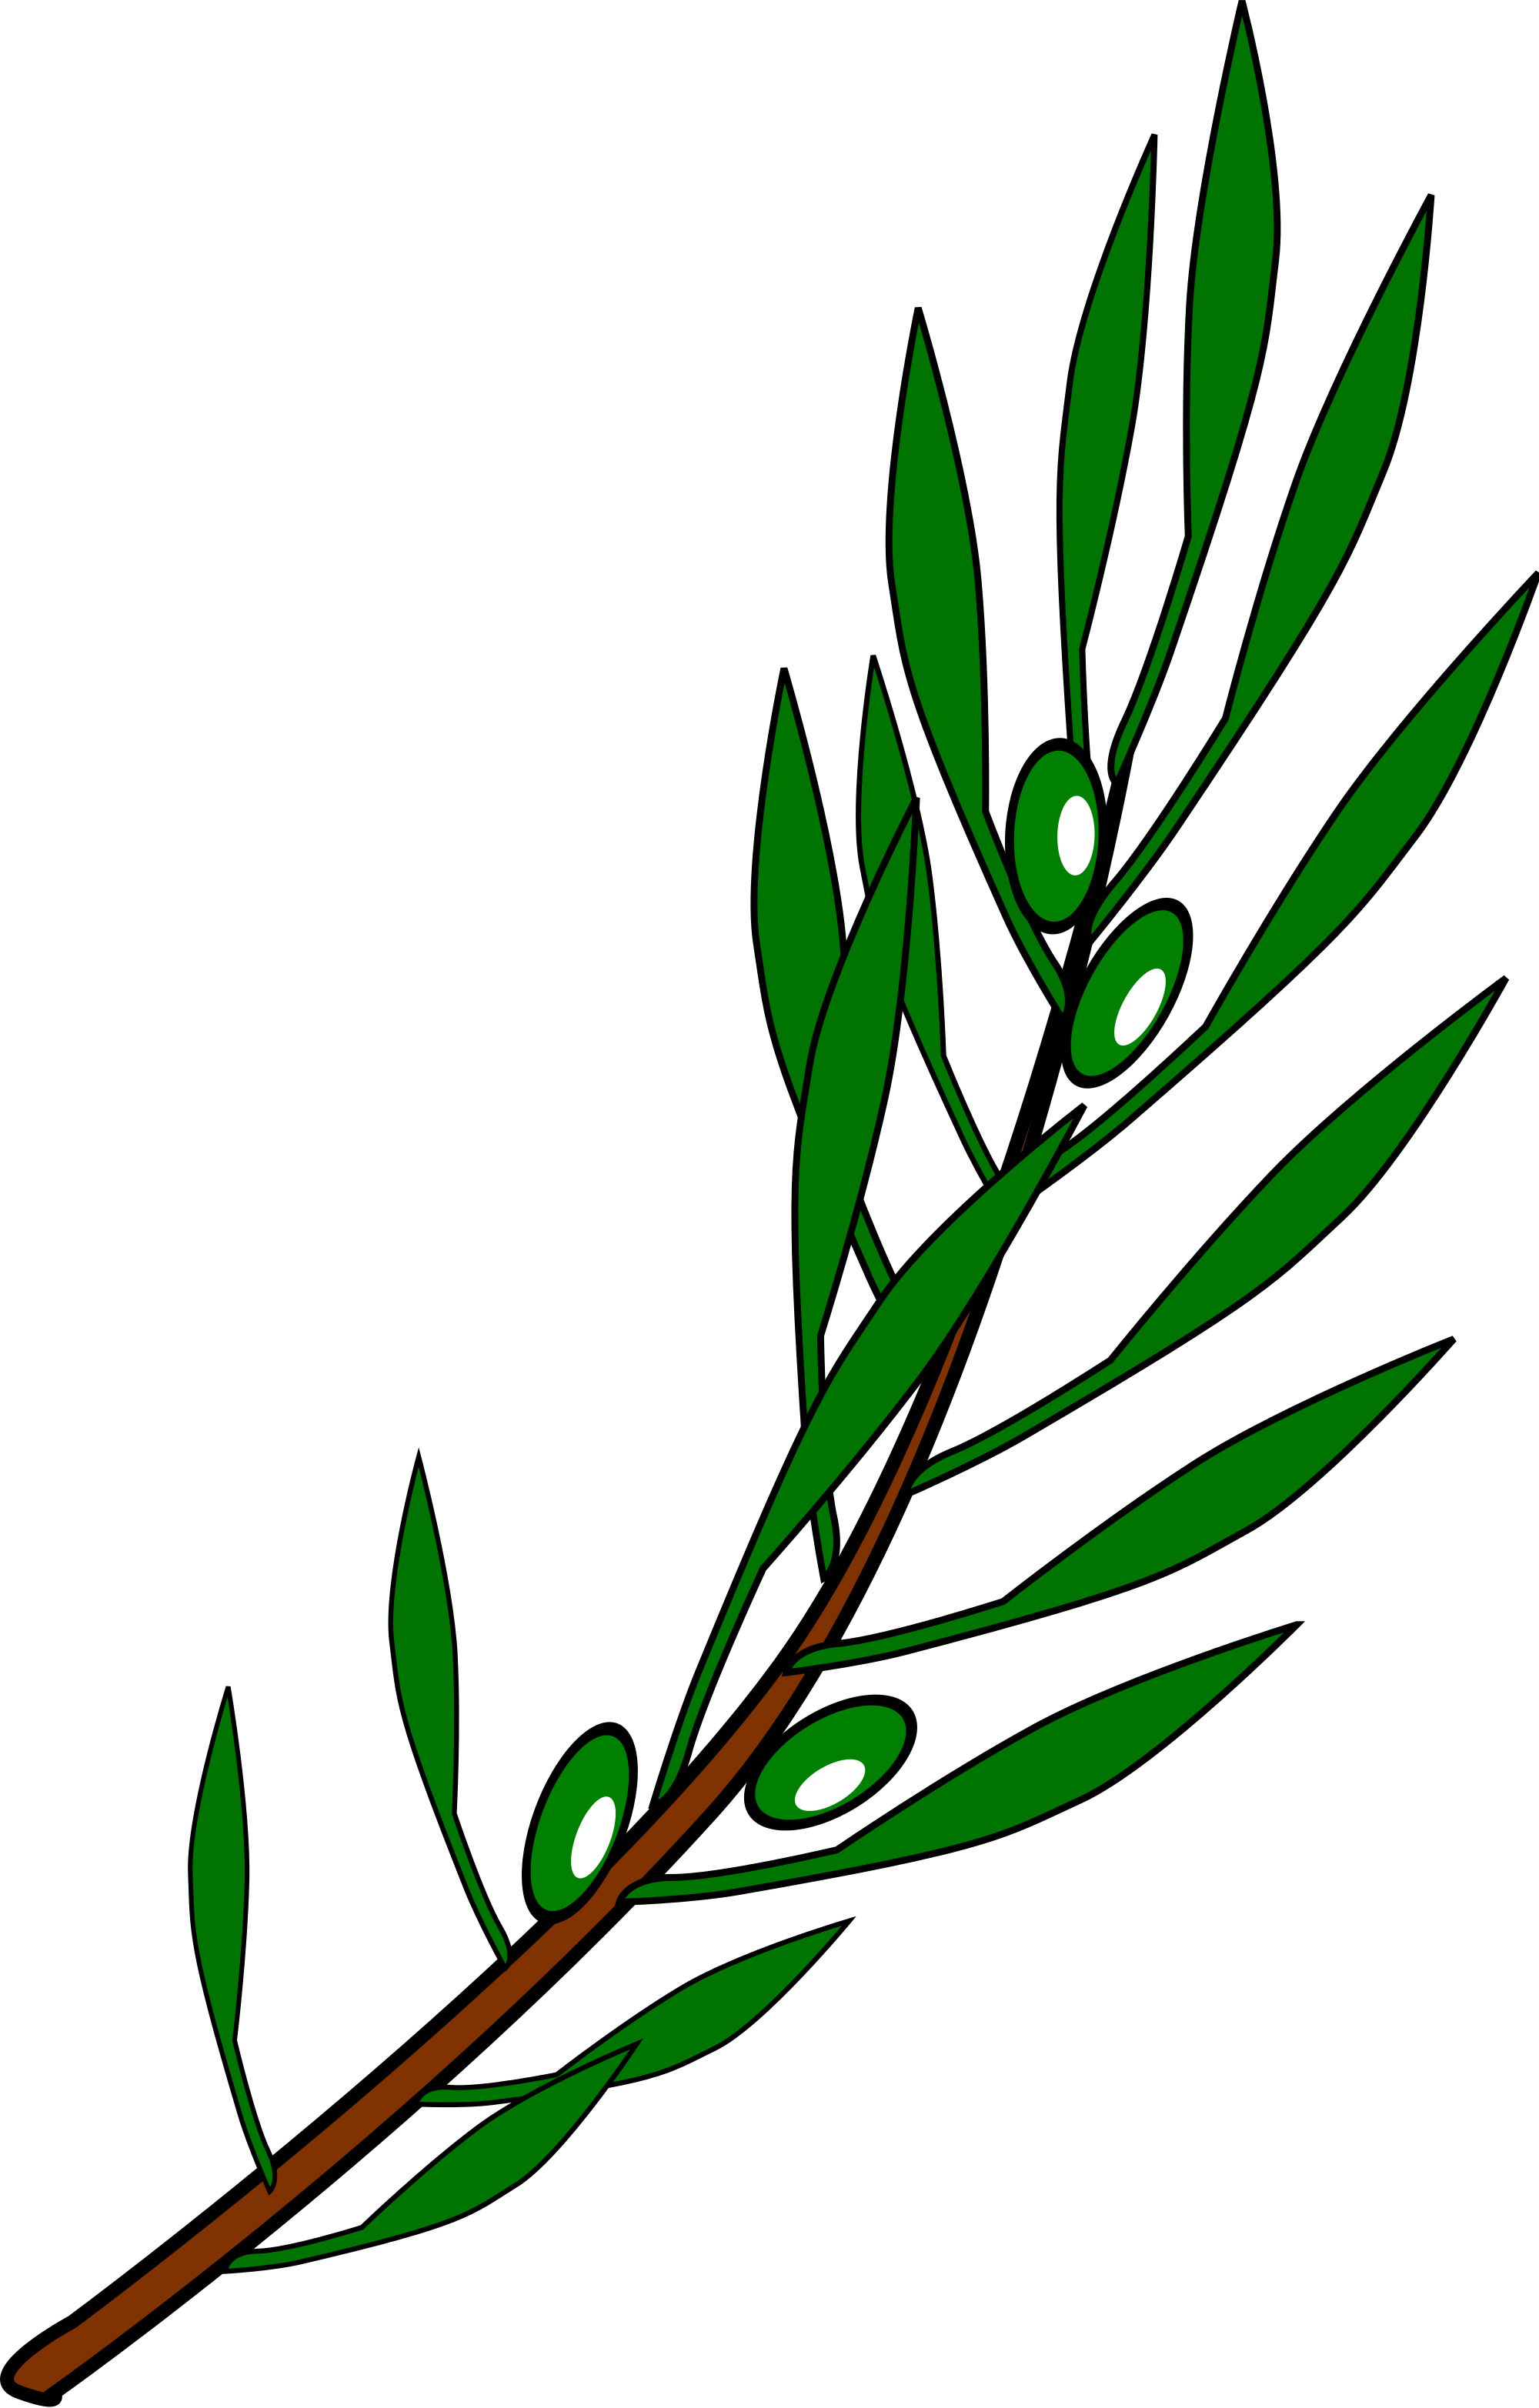 File:Olive branch drawing.svg - Wikimedia Commons